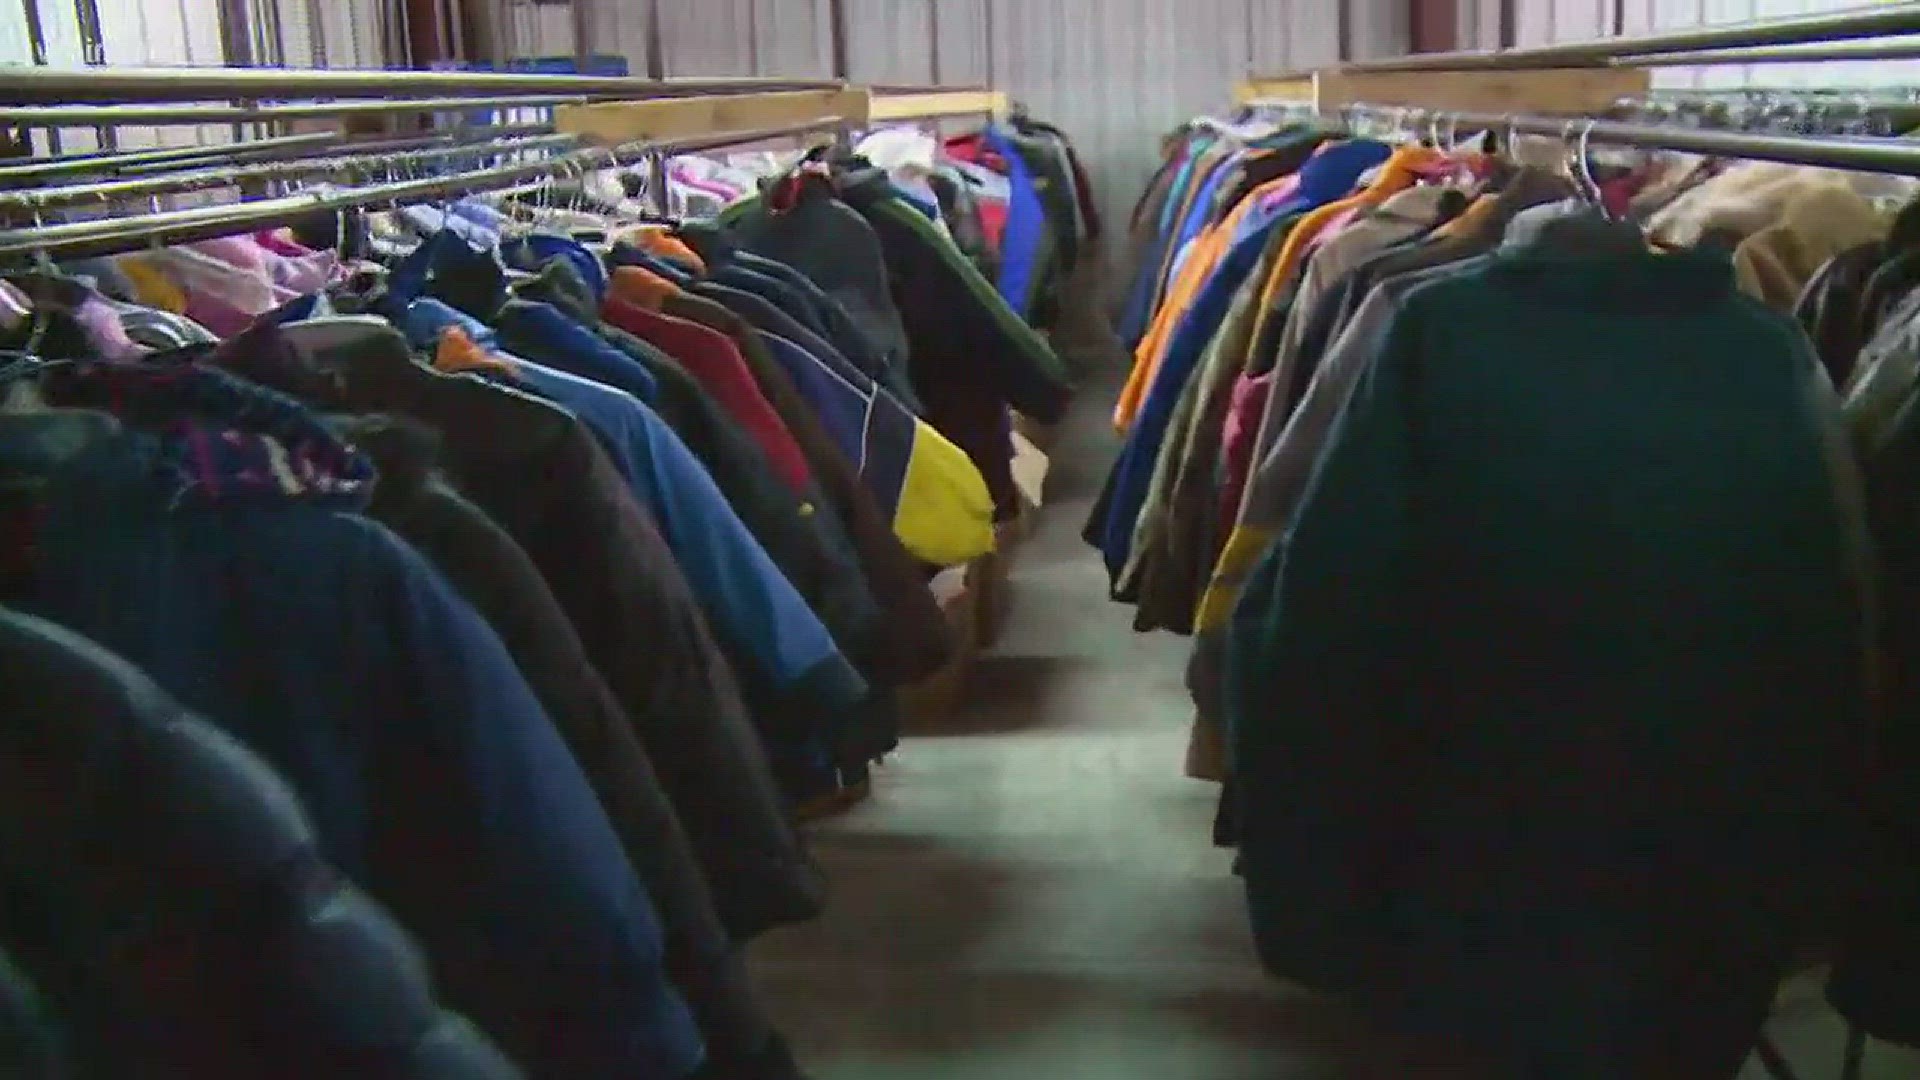 Coats are needed to help those in need this winter.